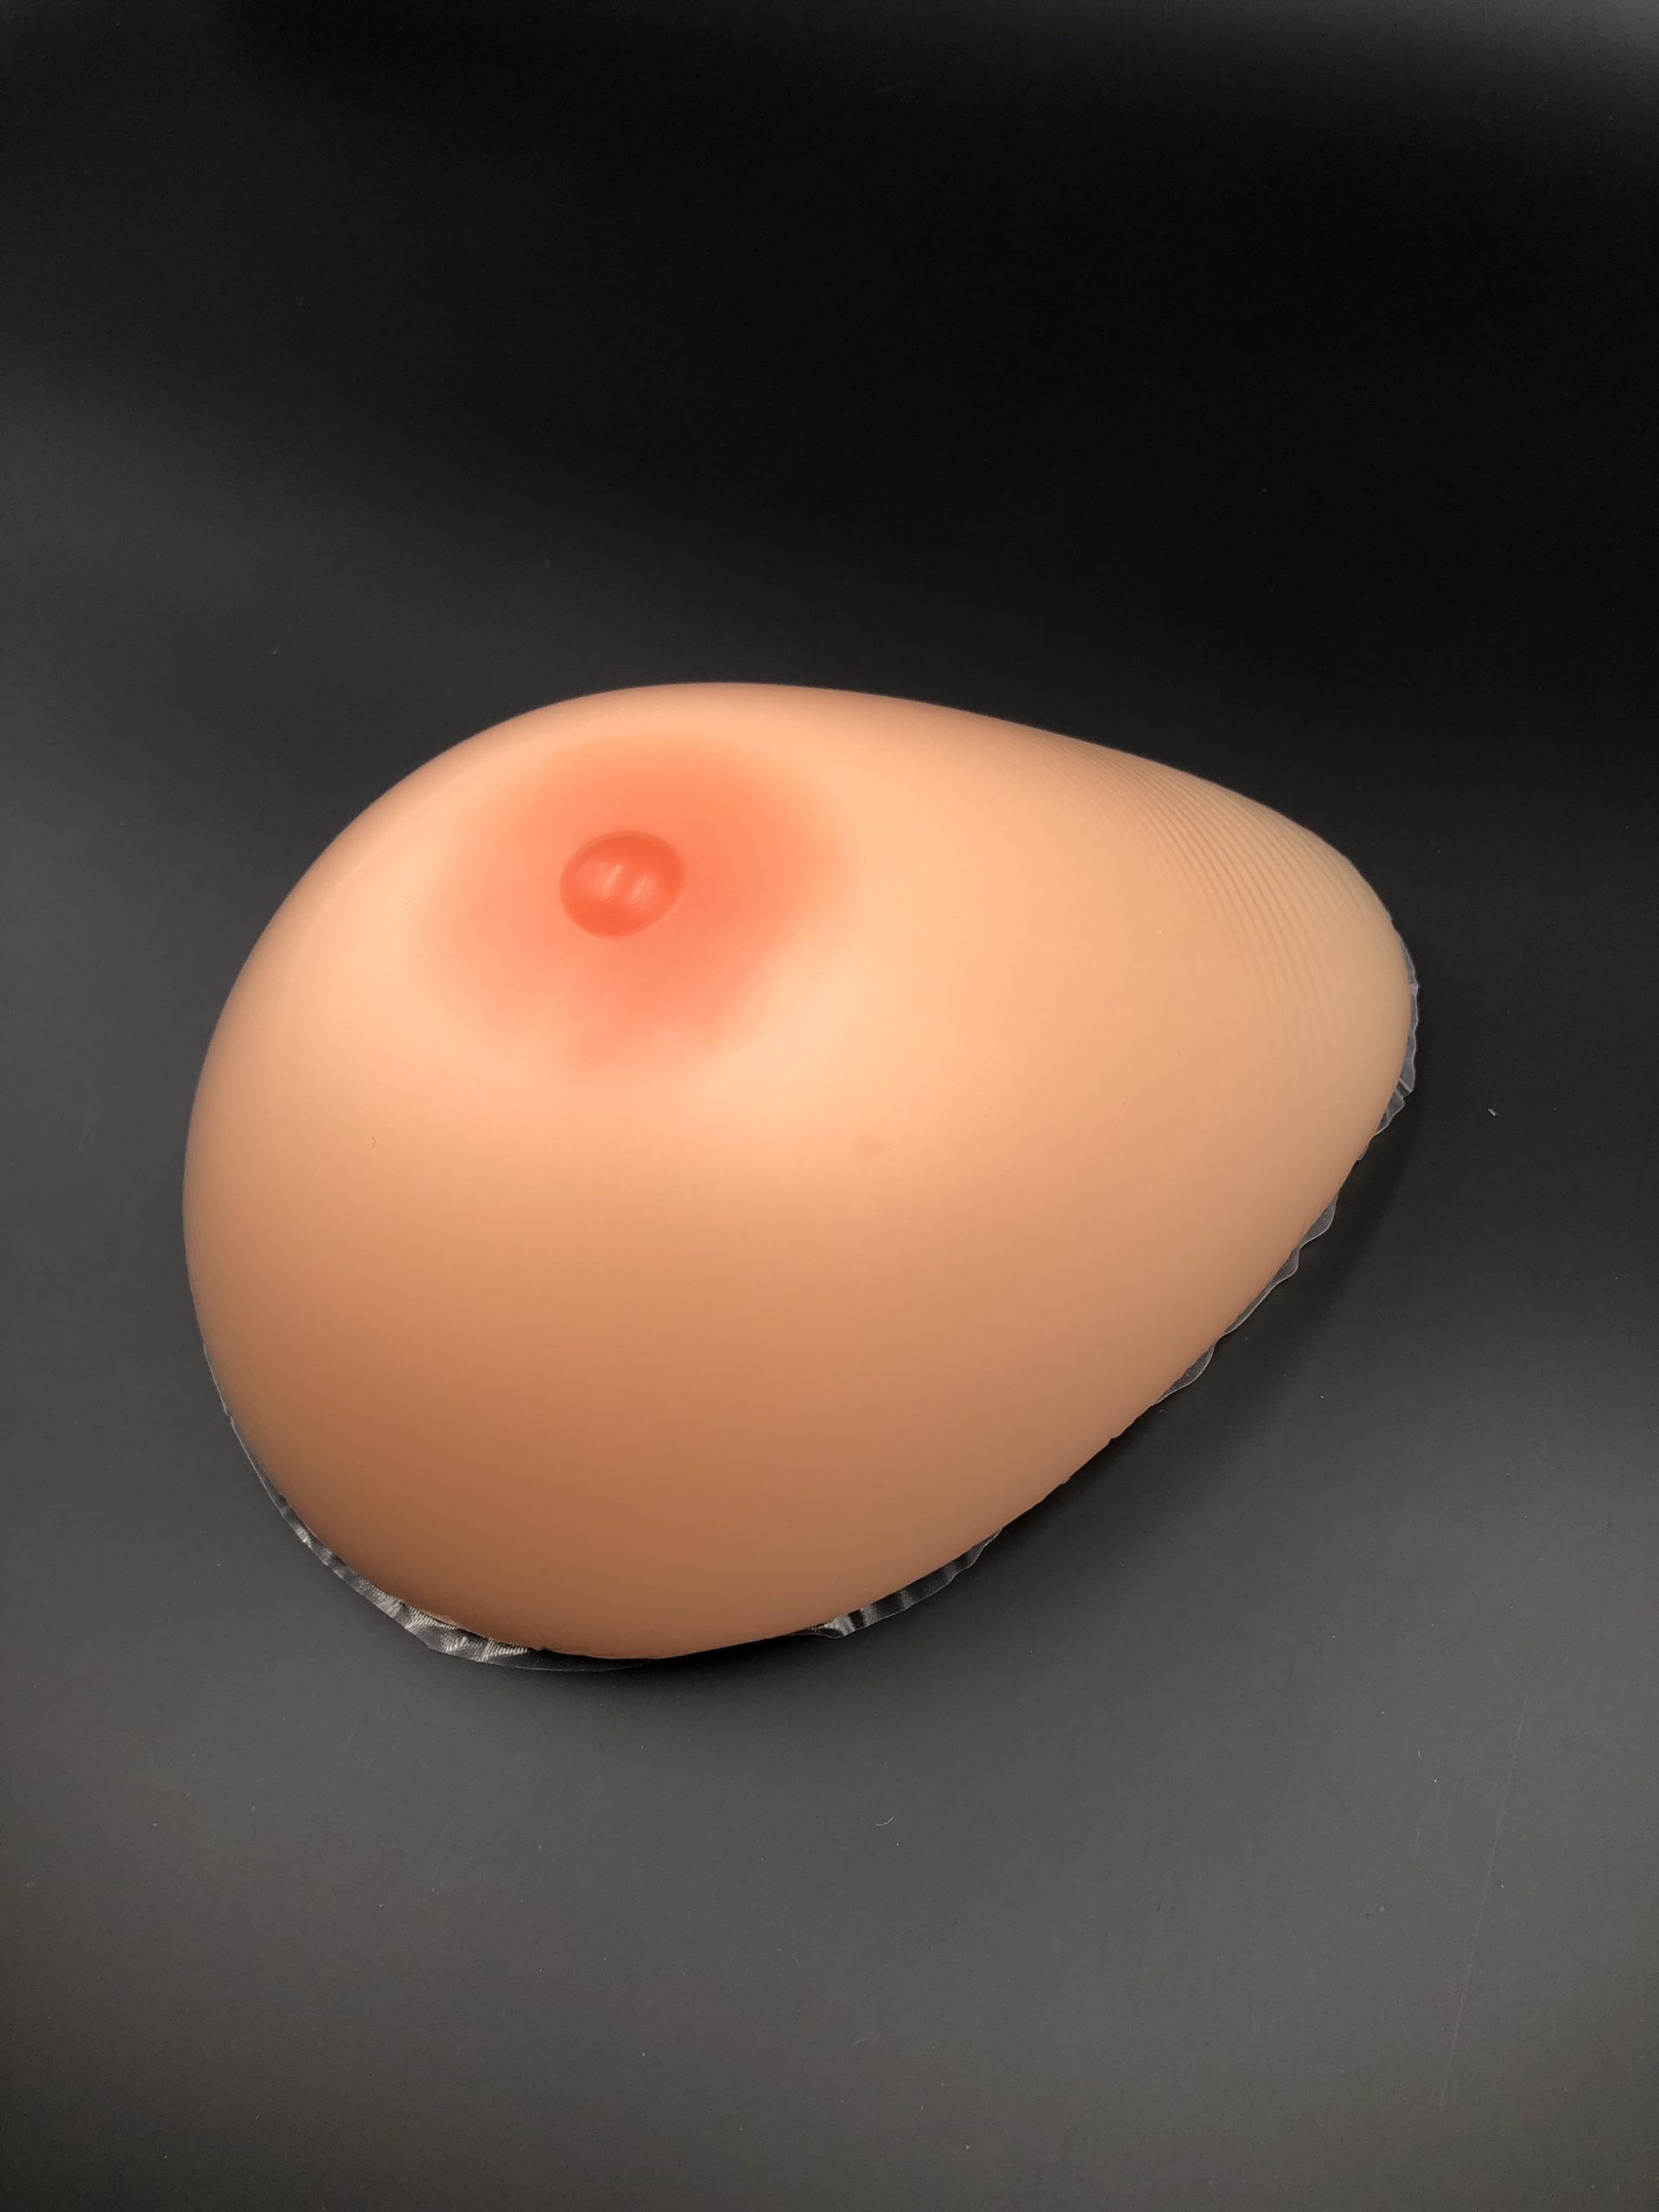 What Is Breast Prosthesis